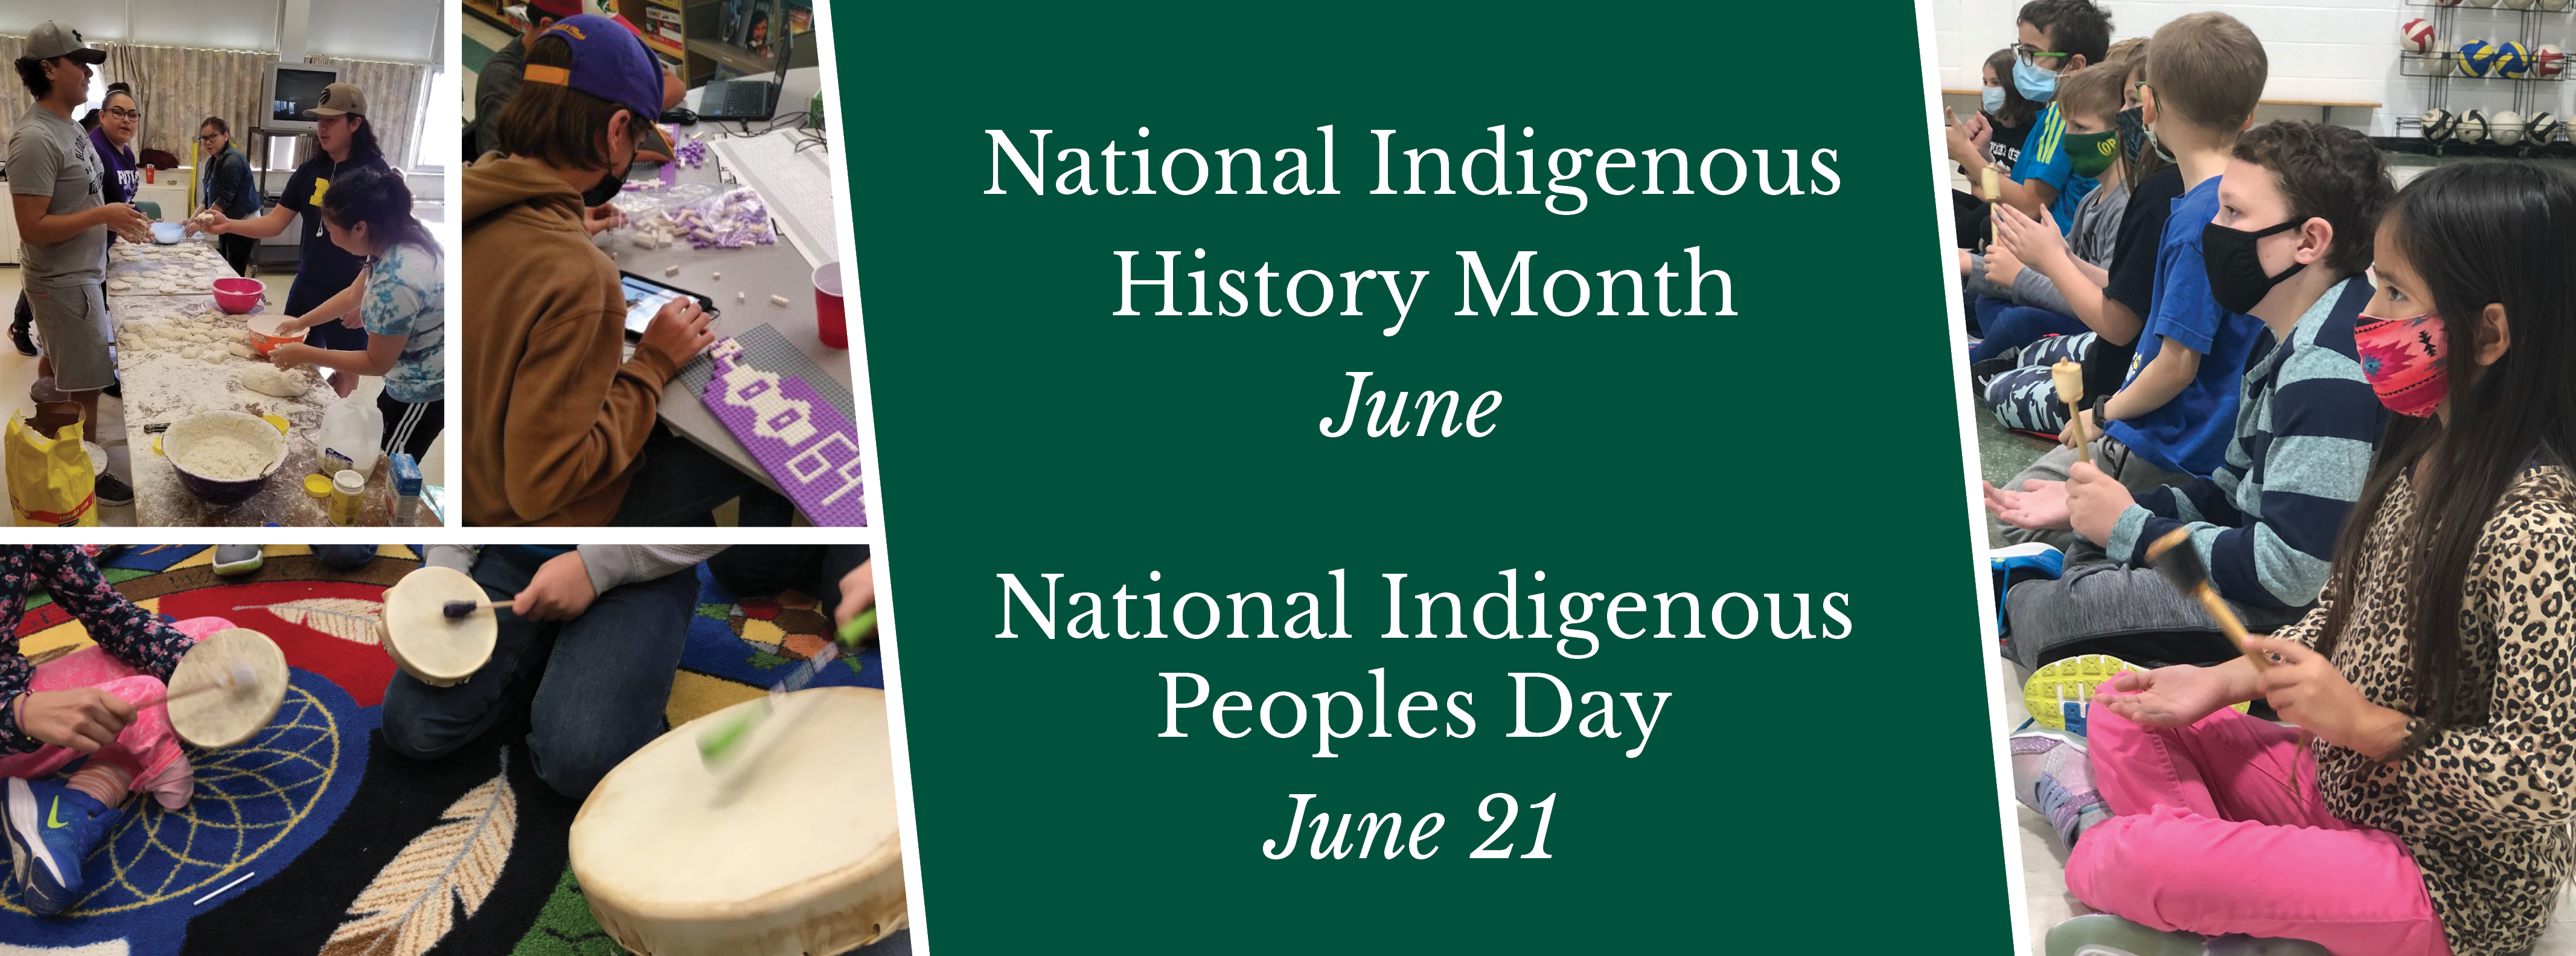 National Indigenous Peoples Day - website banner.png